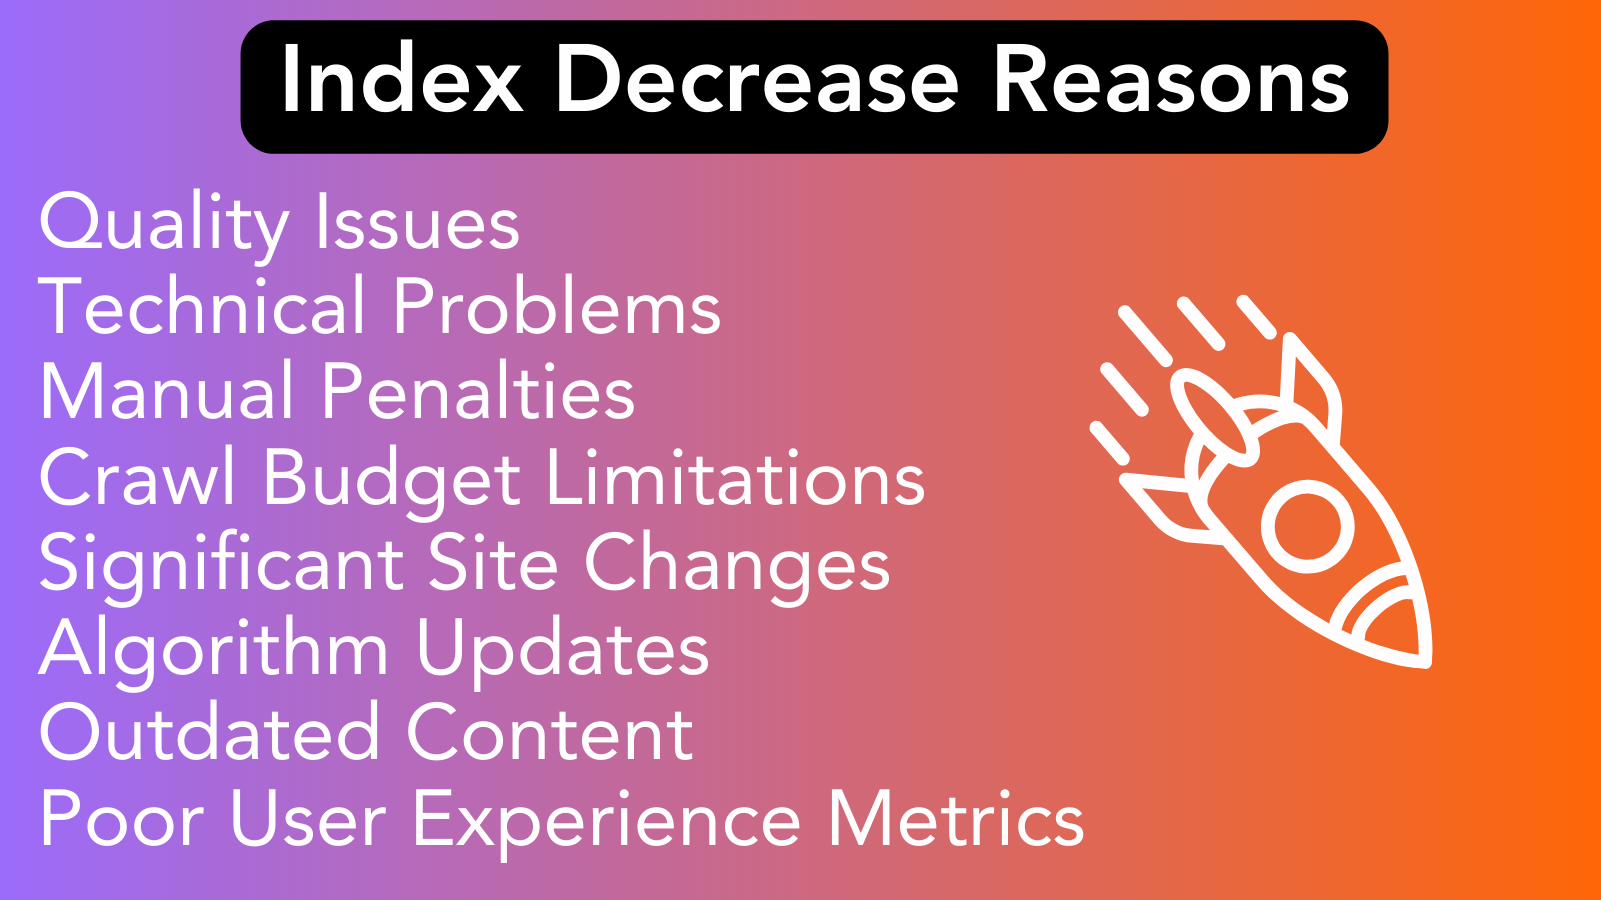 Reasons and solutions for no indexing &#038; How to recover from Google penalties